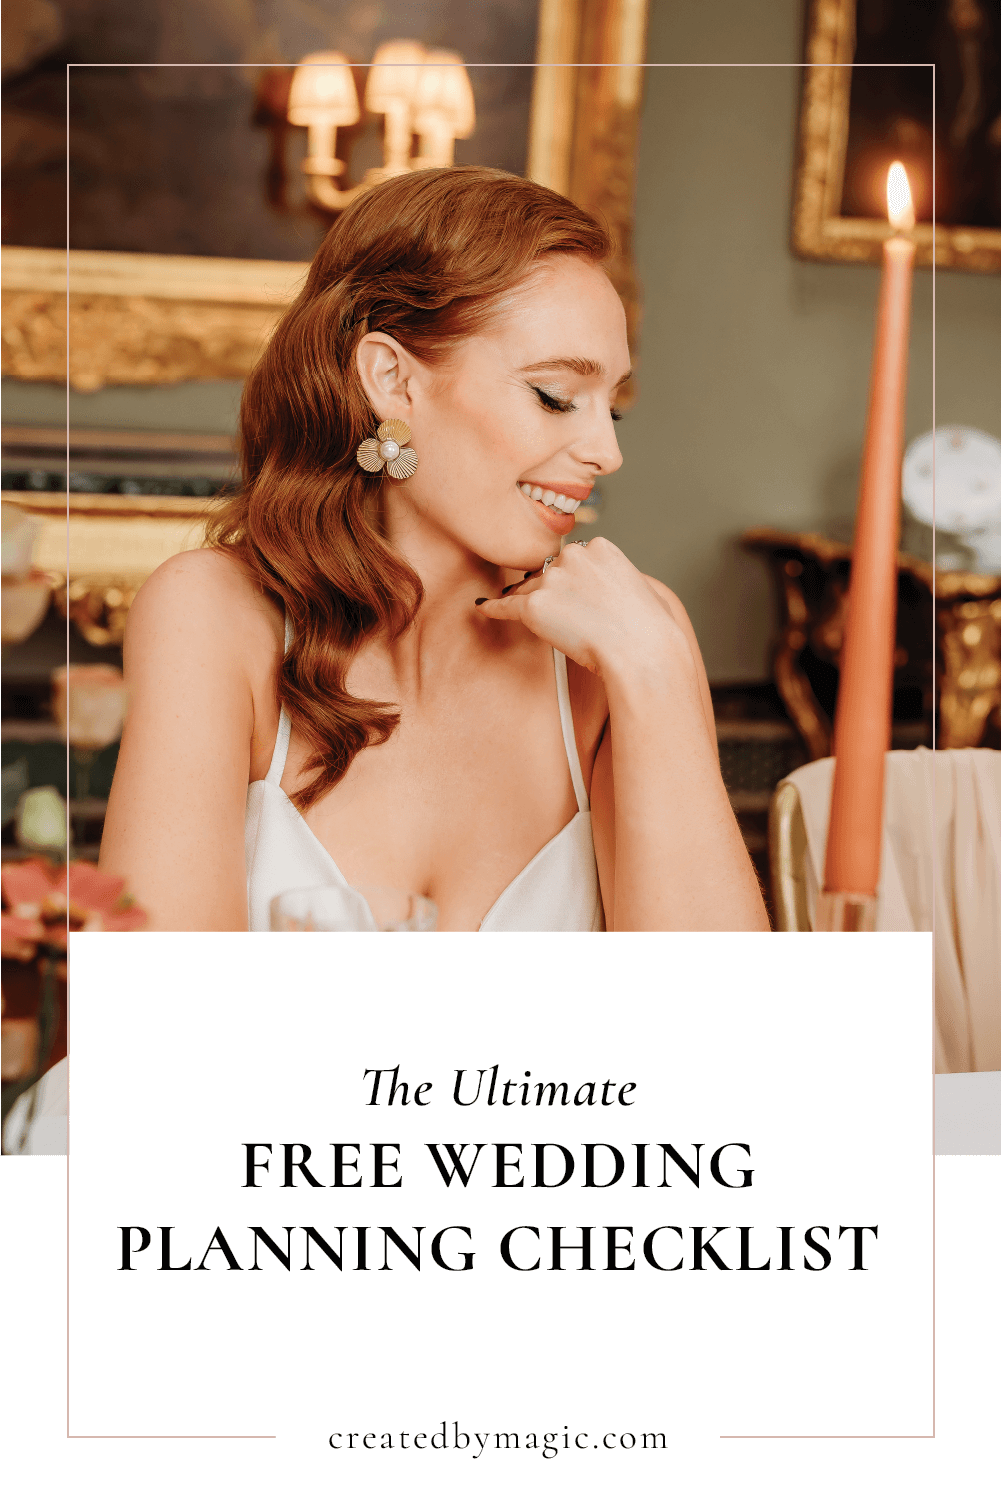 THE ULTIMATE FREE WEDDING PLANNING CHECKLIST